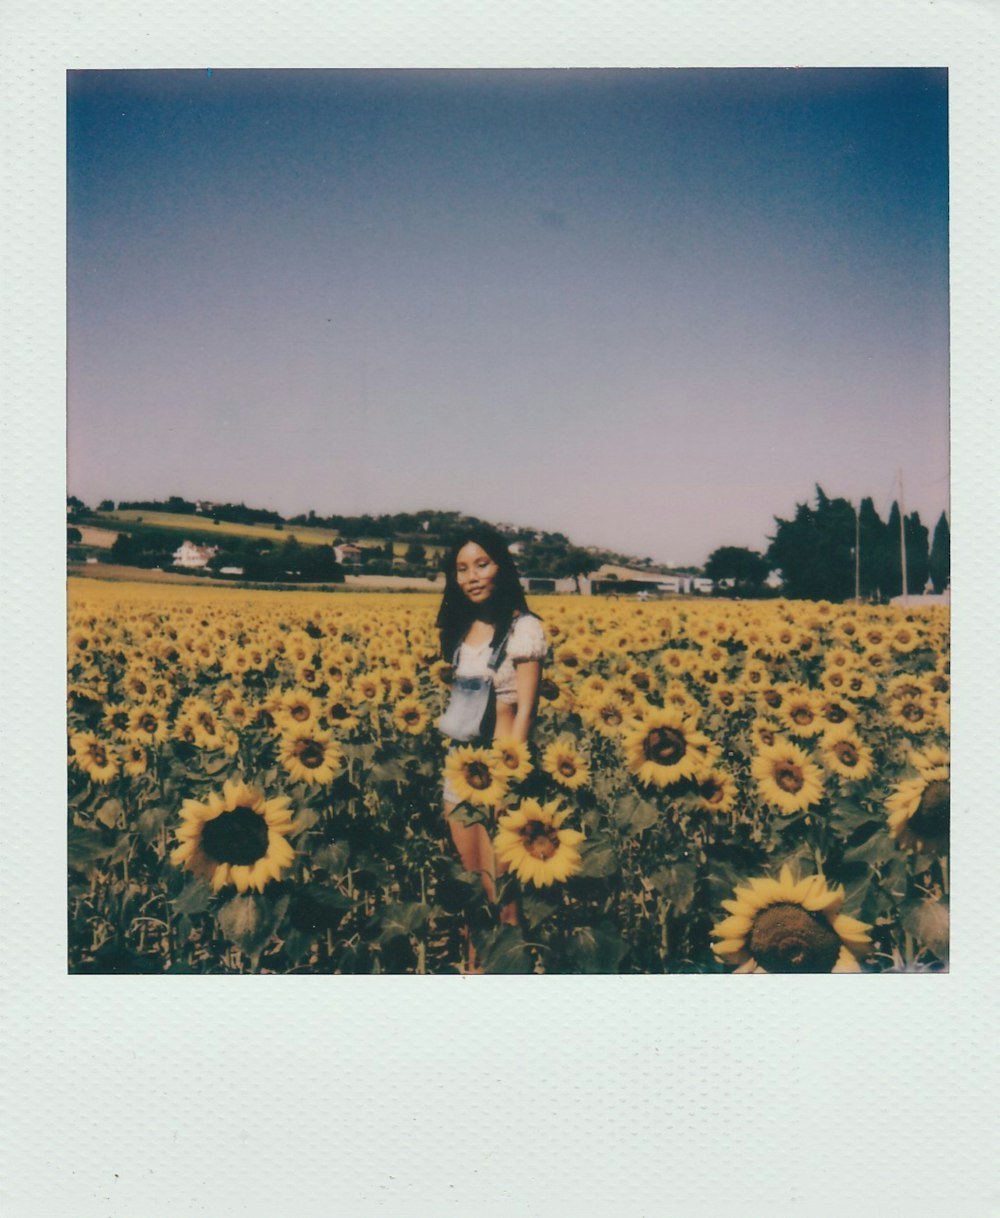 woman in black tank top and white shorts standing on sunflower field during daytime